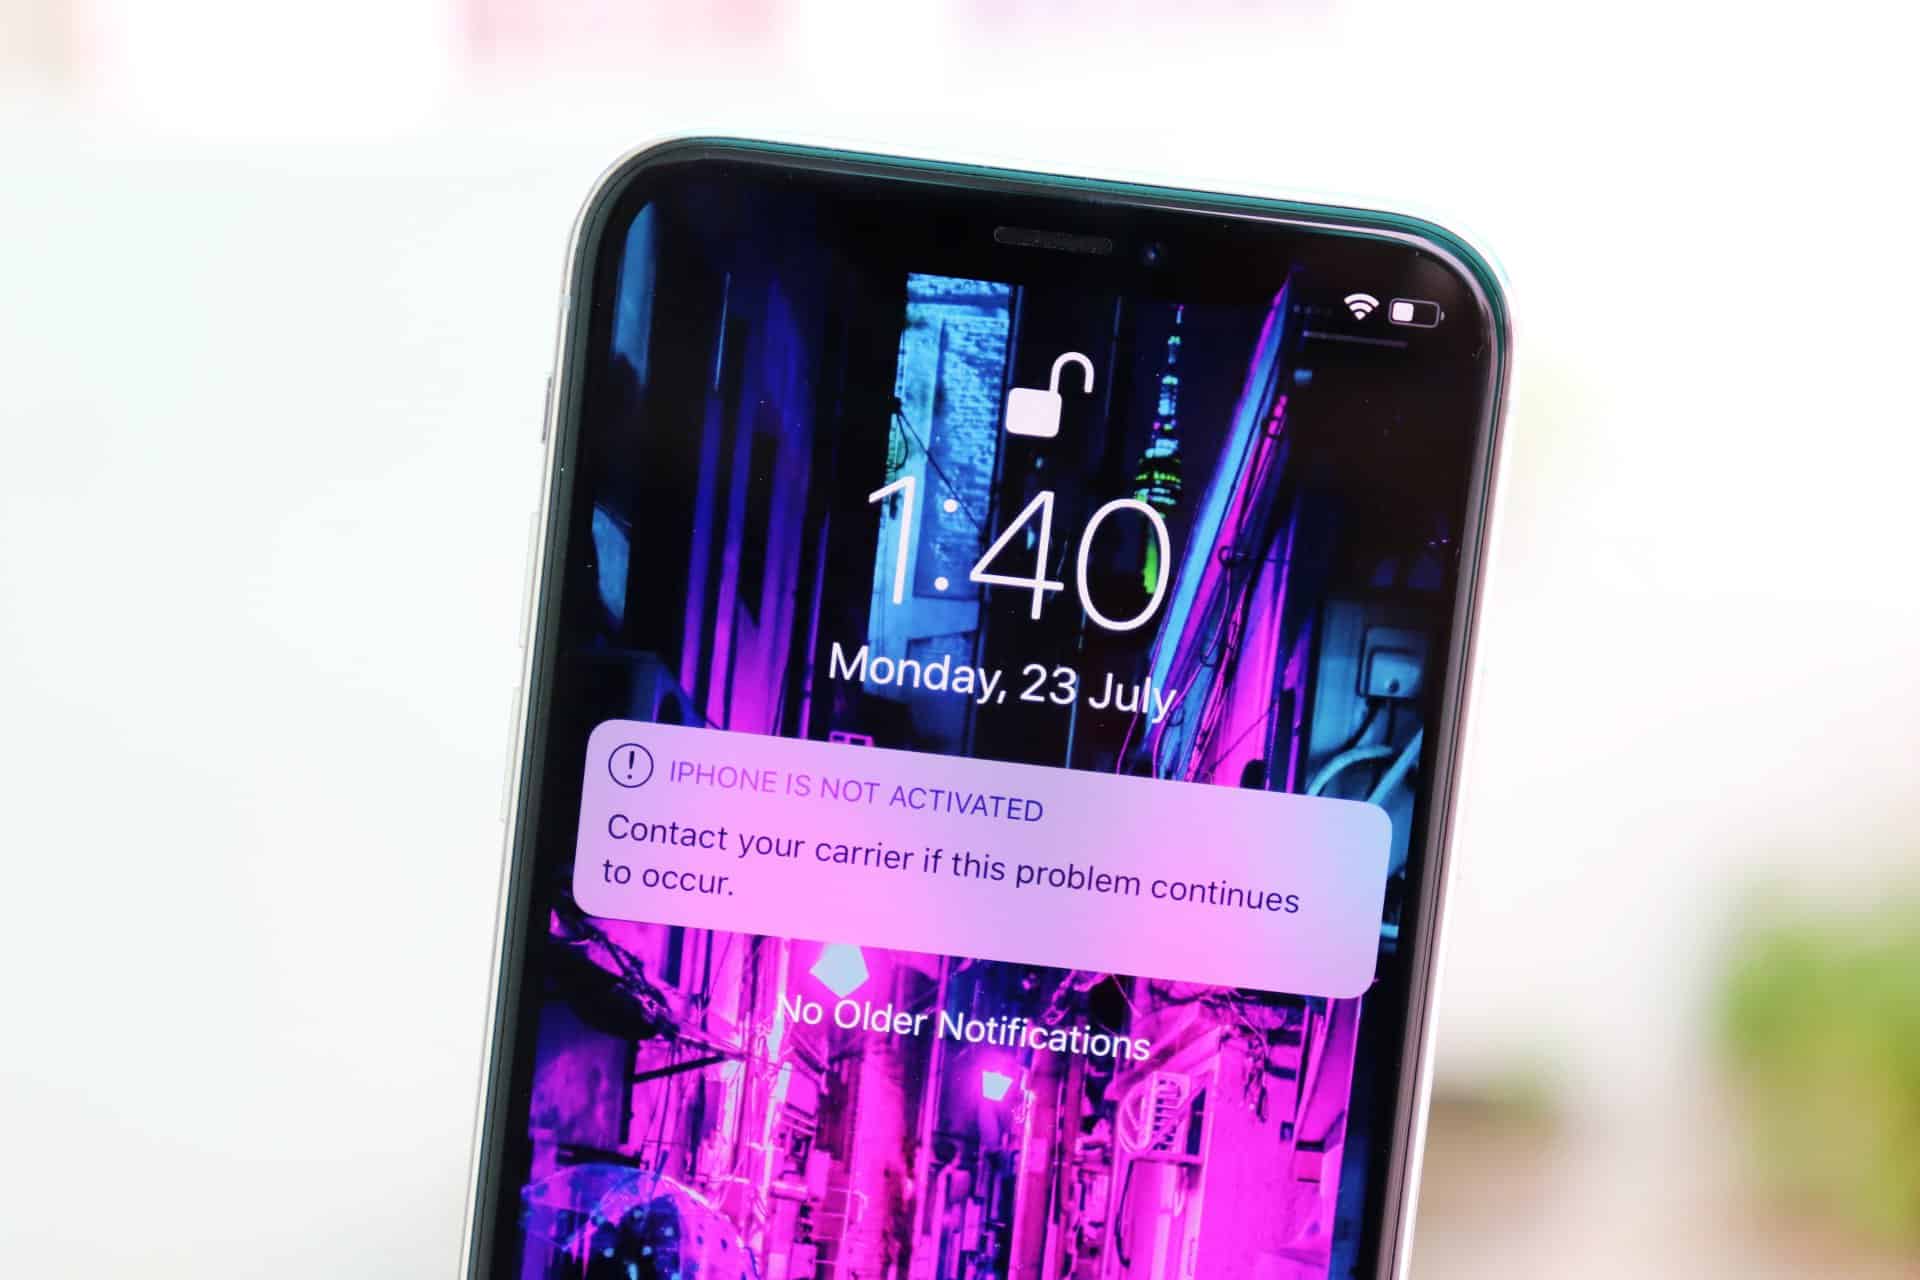 'No Service' on your iPhone after updating iOS 11.4.1? Here's a fix